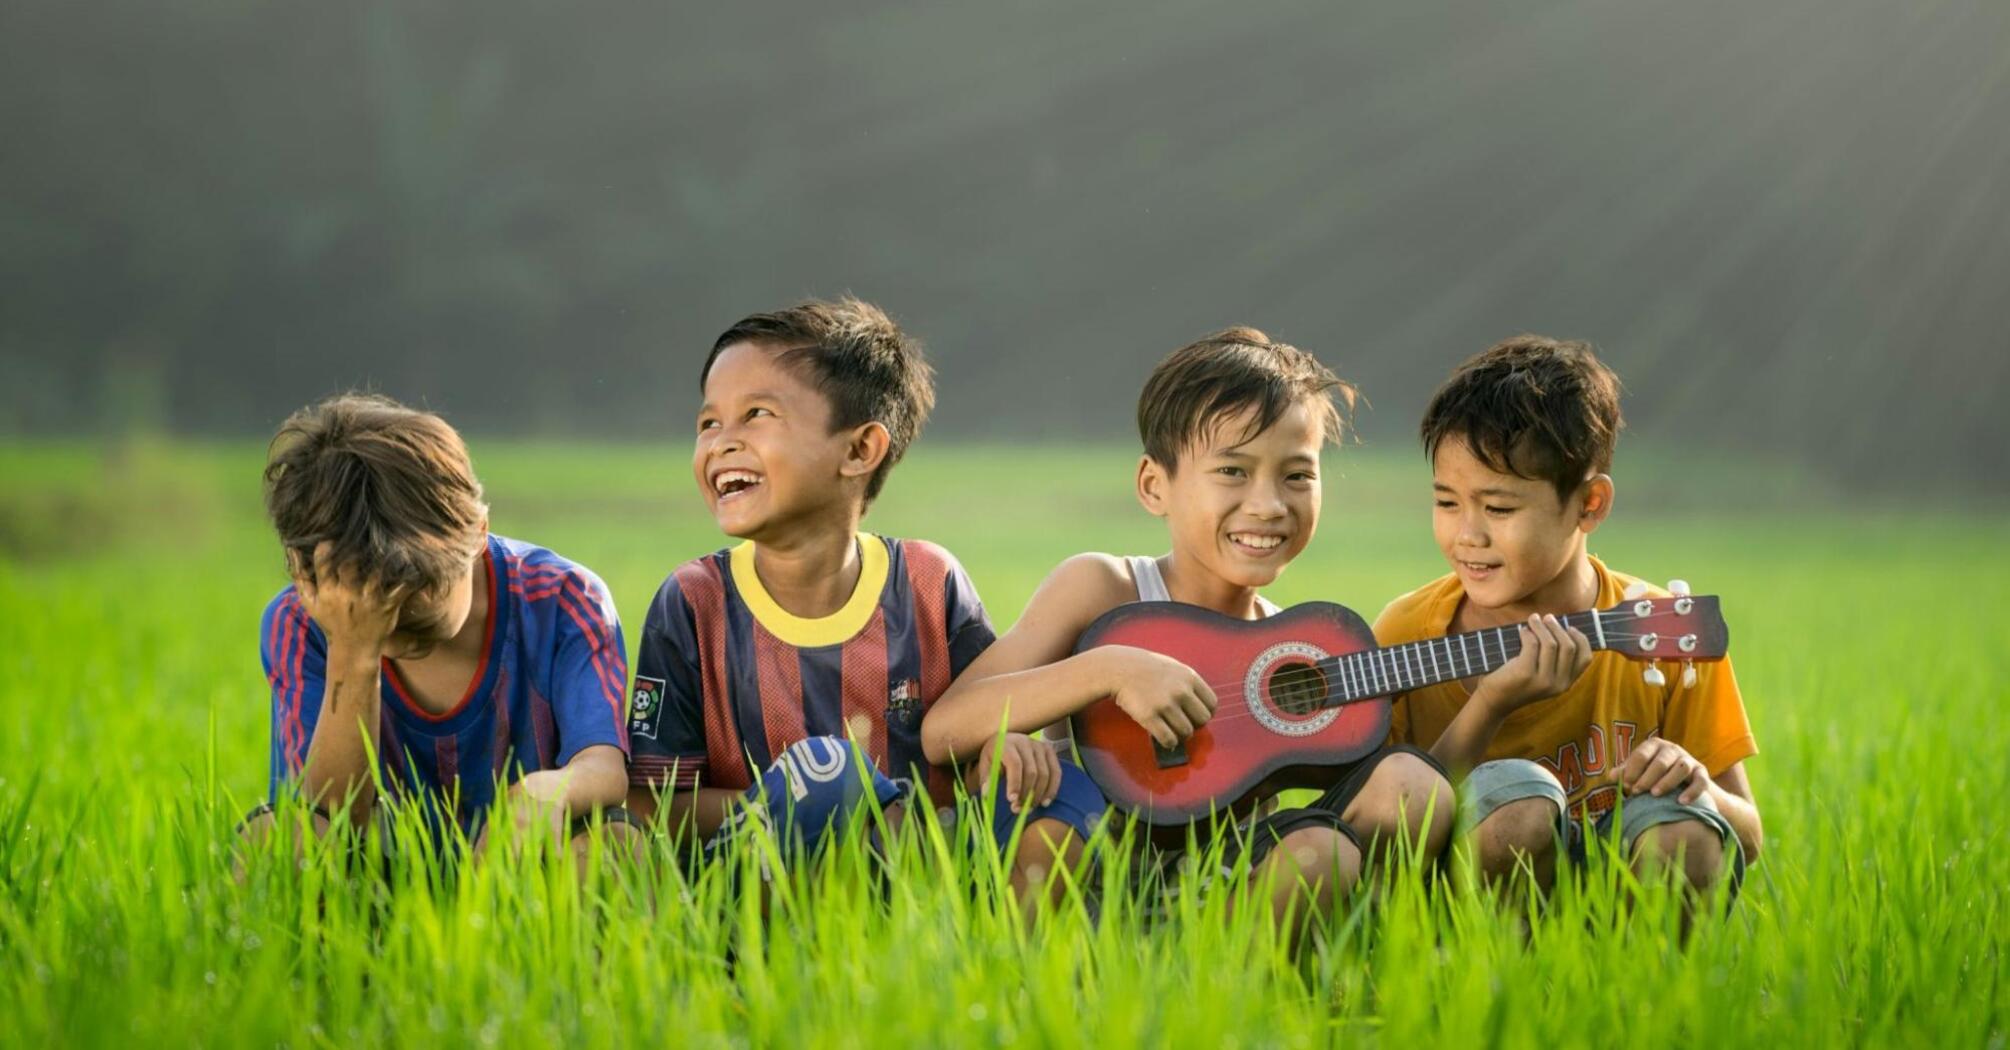 Four boys laugh on the grass, one plays the guitar